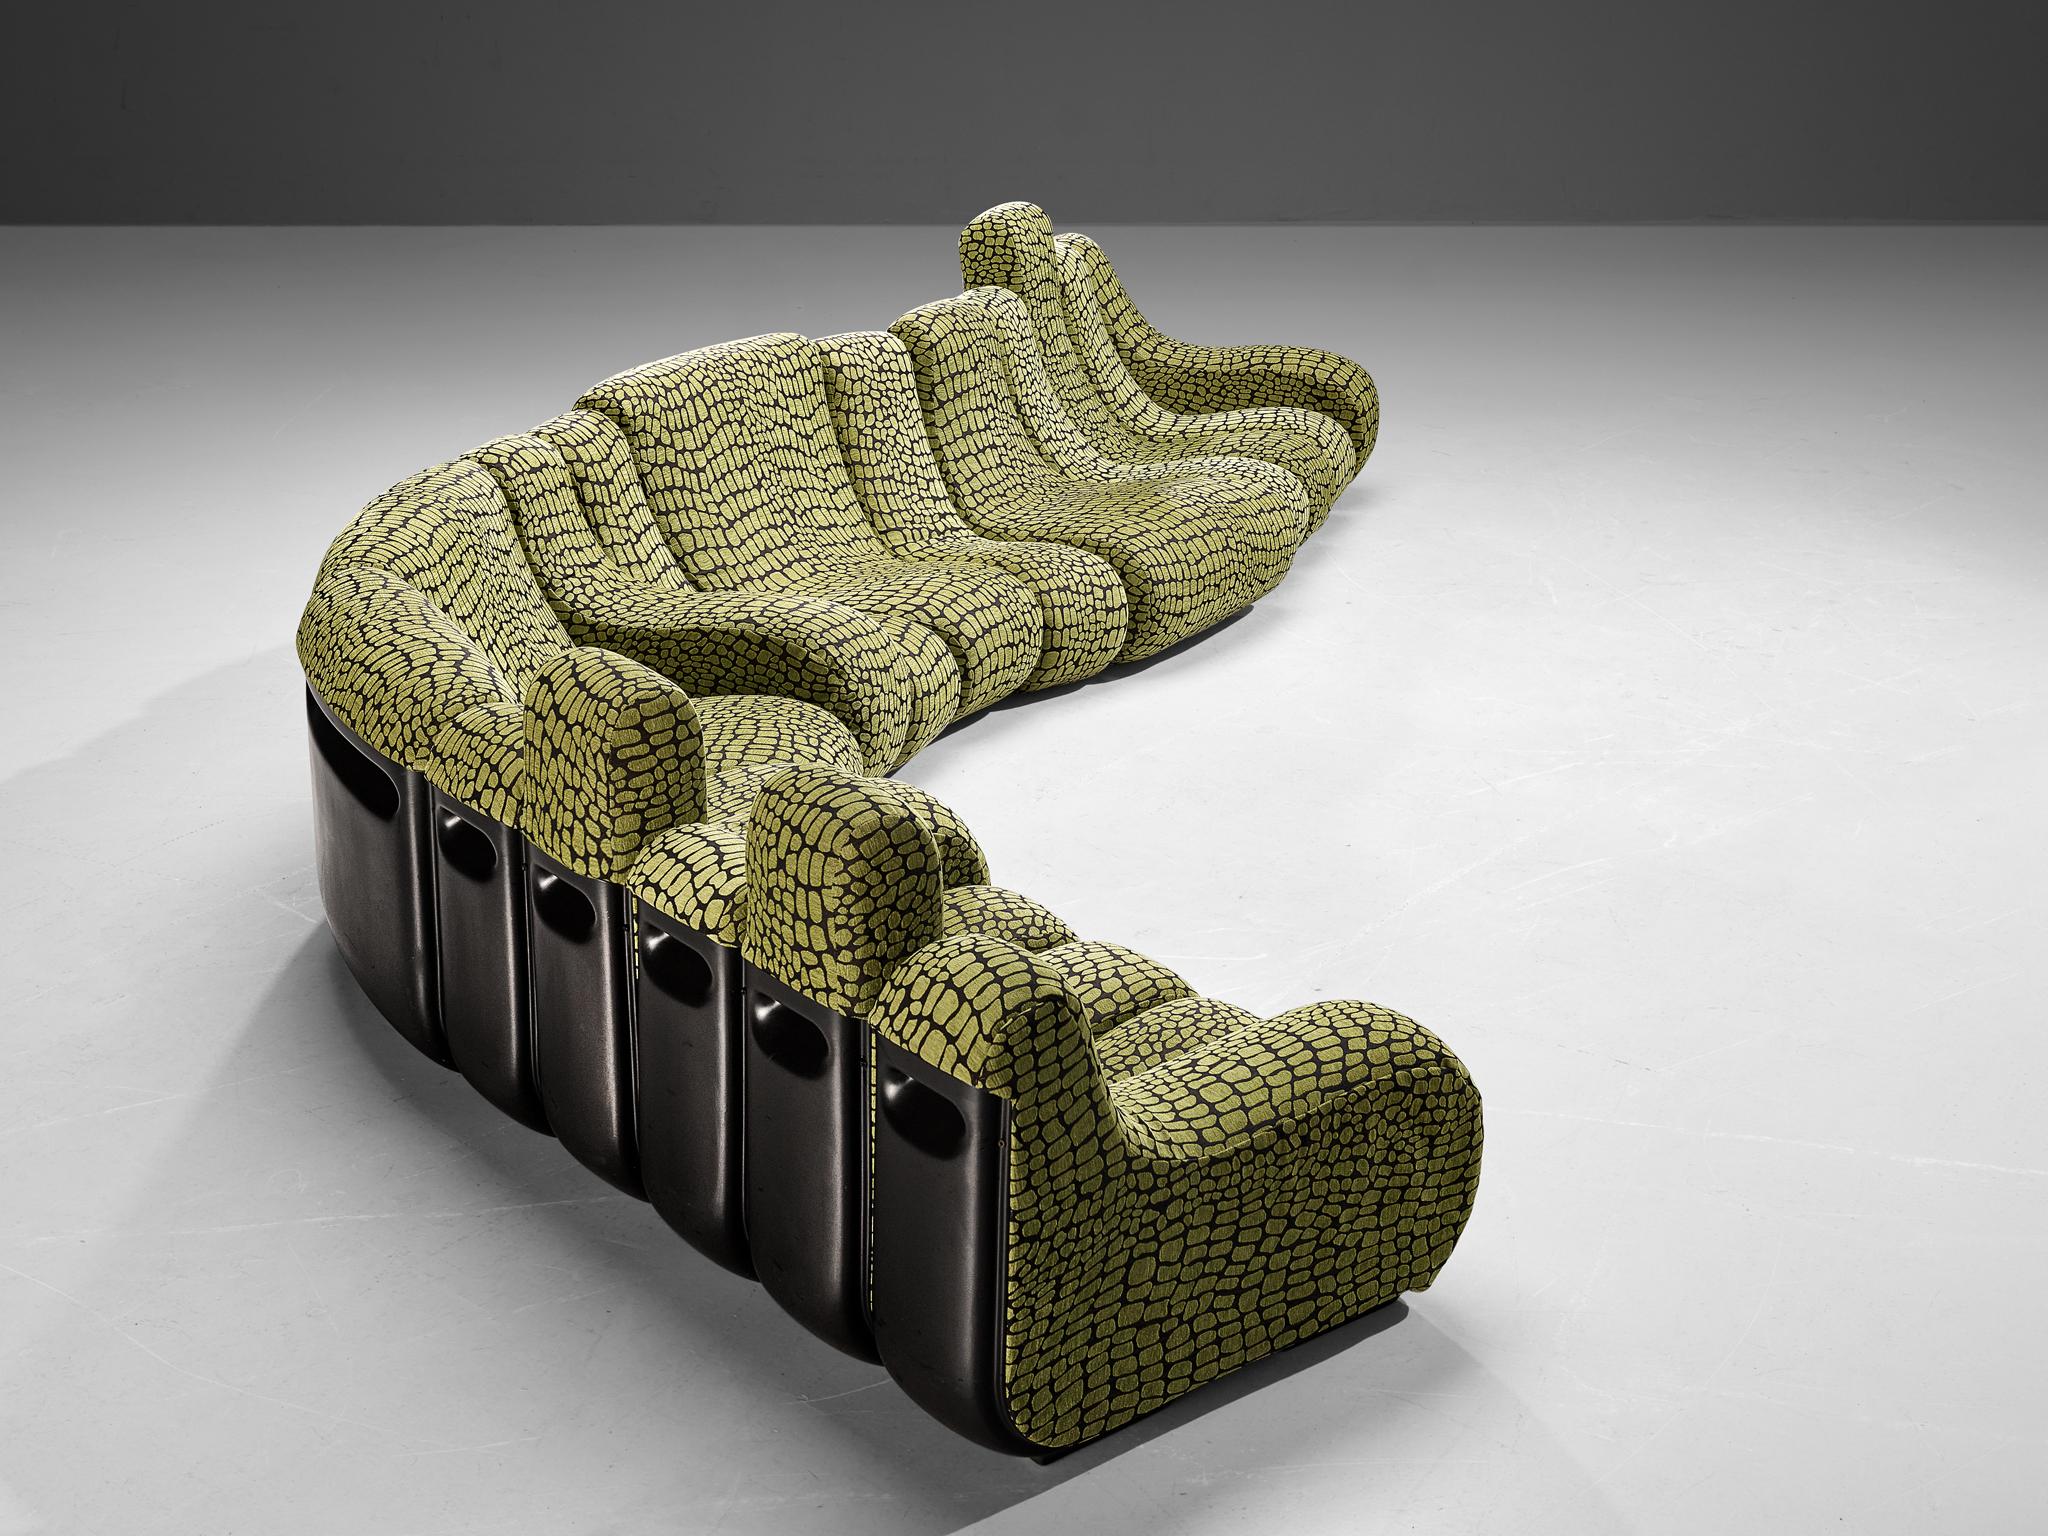 Burkhard Vogtherr for Rosenthal, model 'Vario Pillo', modular sofa, Germany, 1970s

This exuberant buildable sofa is designed by Burkhard Vogtherr. A very rare type of modular sofa with amazing black and green alligator print fabric. The sofa